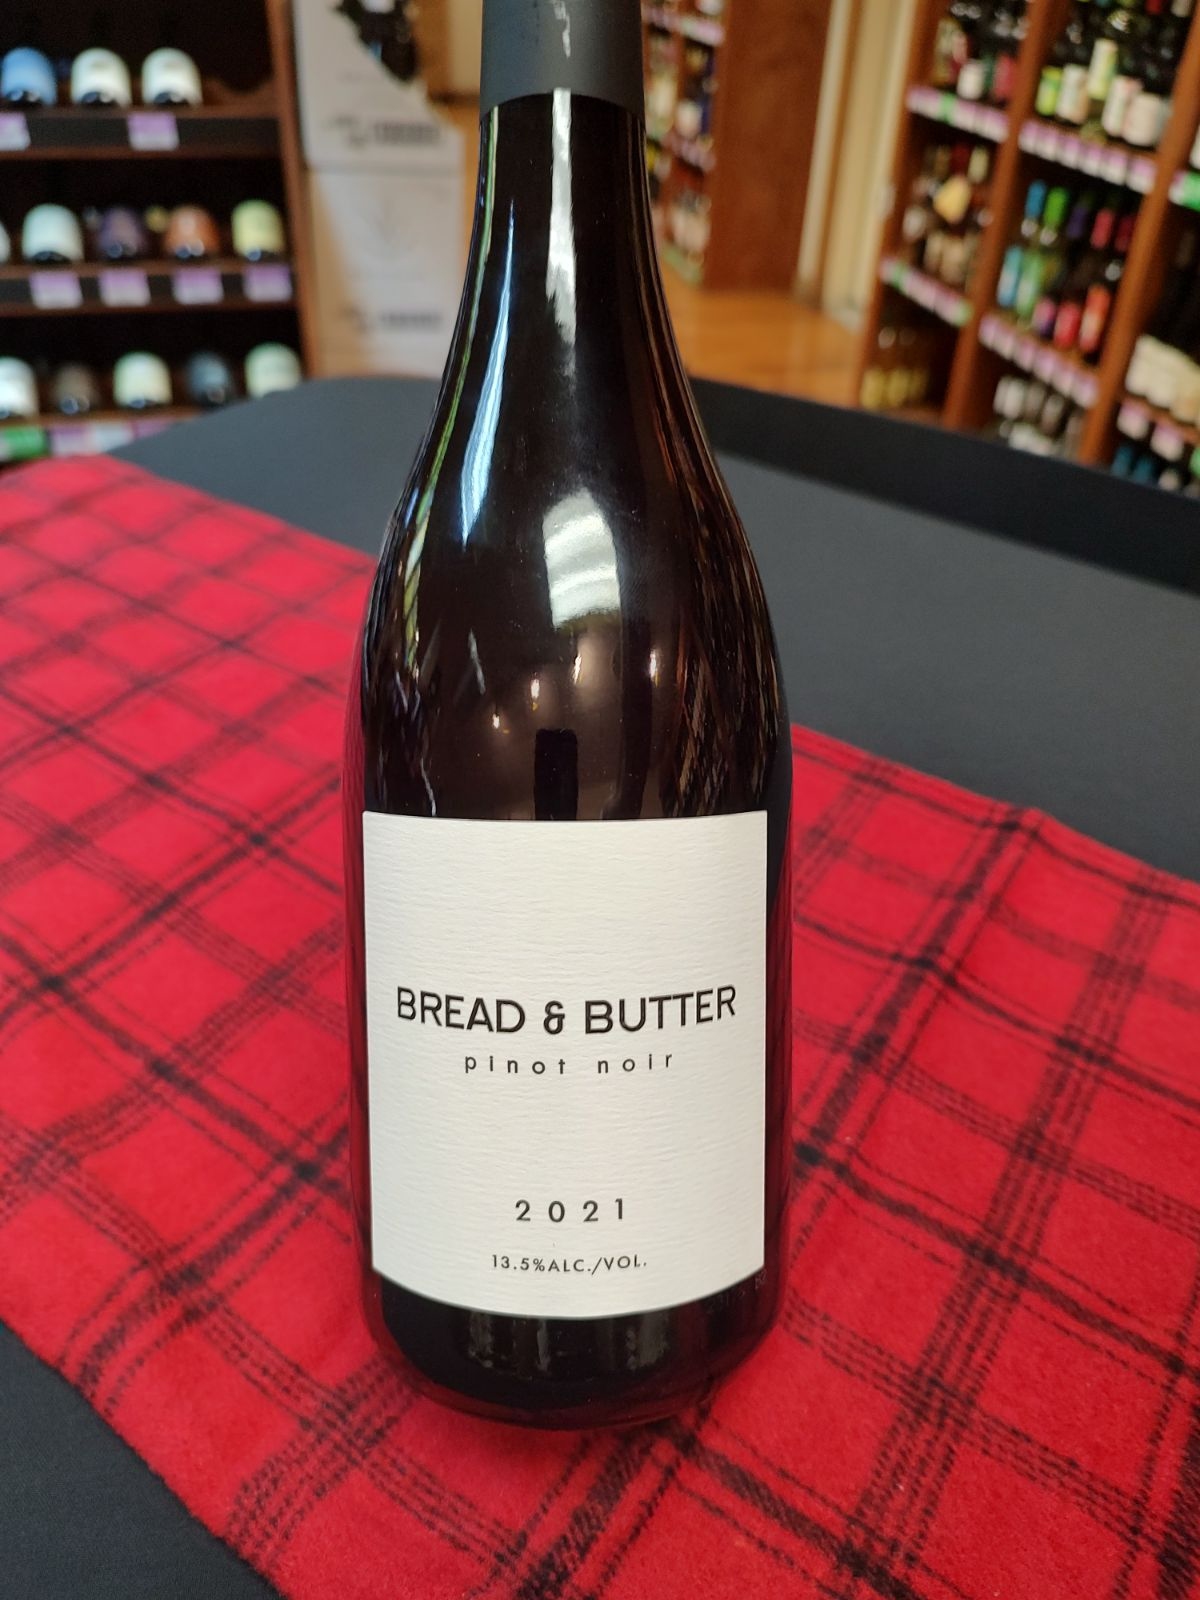 A bottle of Bread & Butter Pinot Noir sits on a table inside Macadoodles